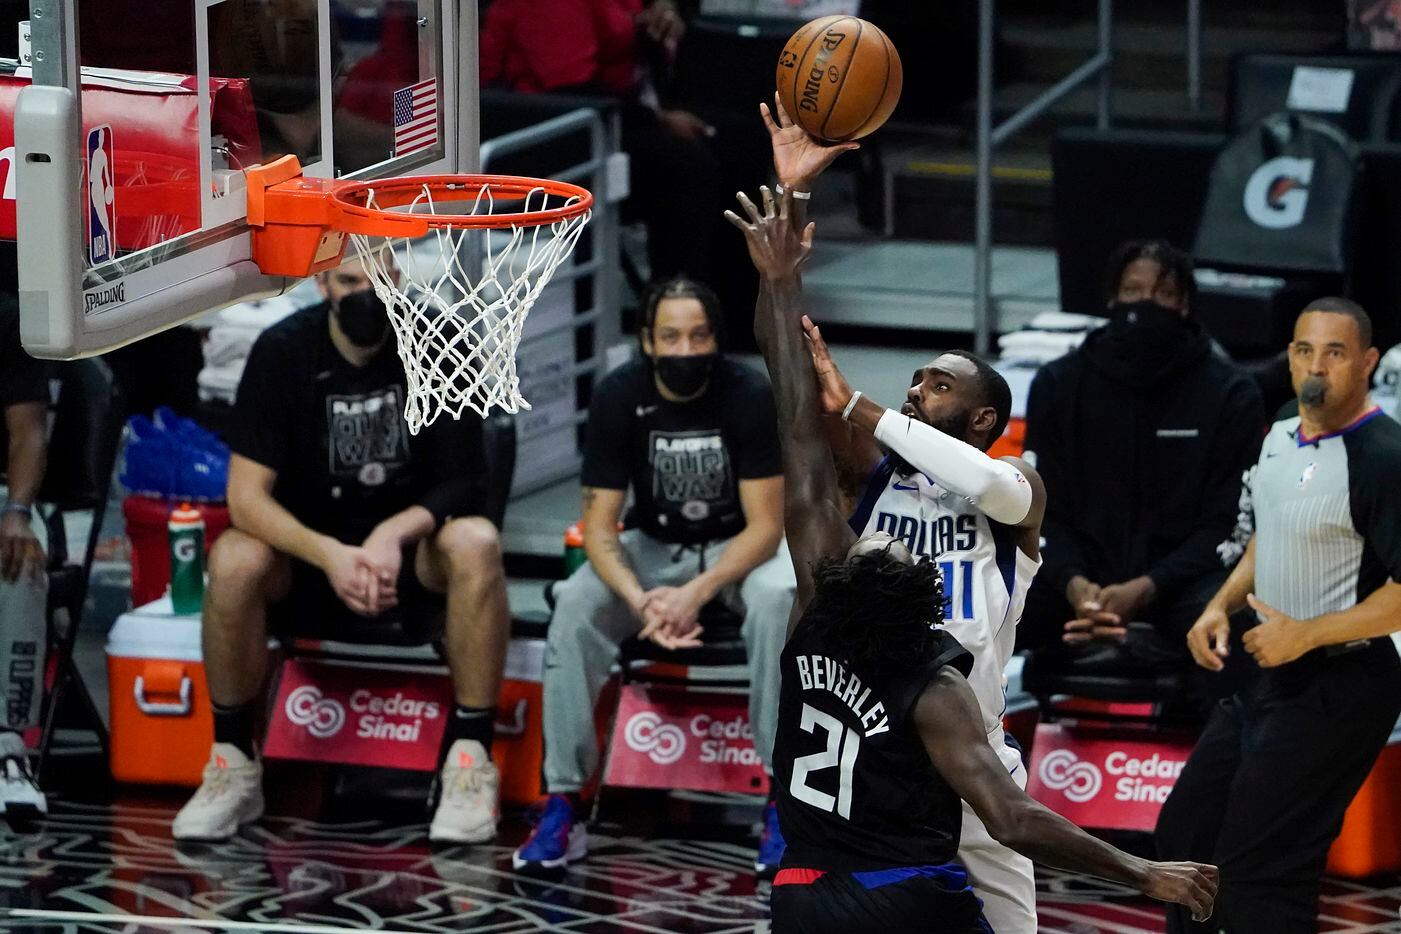 Dallas Mavericks forward Tim Hardaway Jr. (11) shoots over LA Clippers guard Patrick Beverley (21) during the second half of an NBA playoff basketball game at Staples Center on Tuesday, May 25, 2021, in Los Angeles. The Mavericks won the game 127-121.